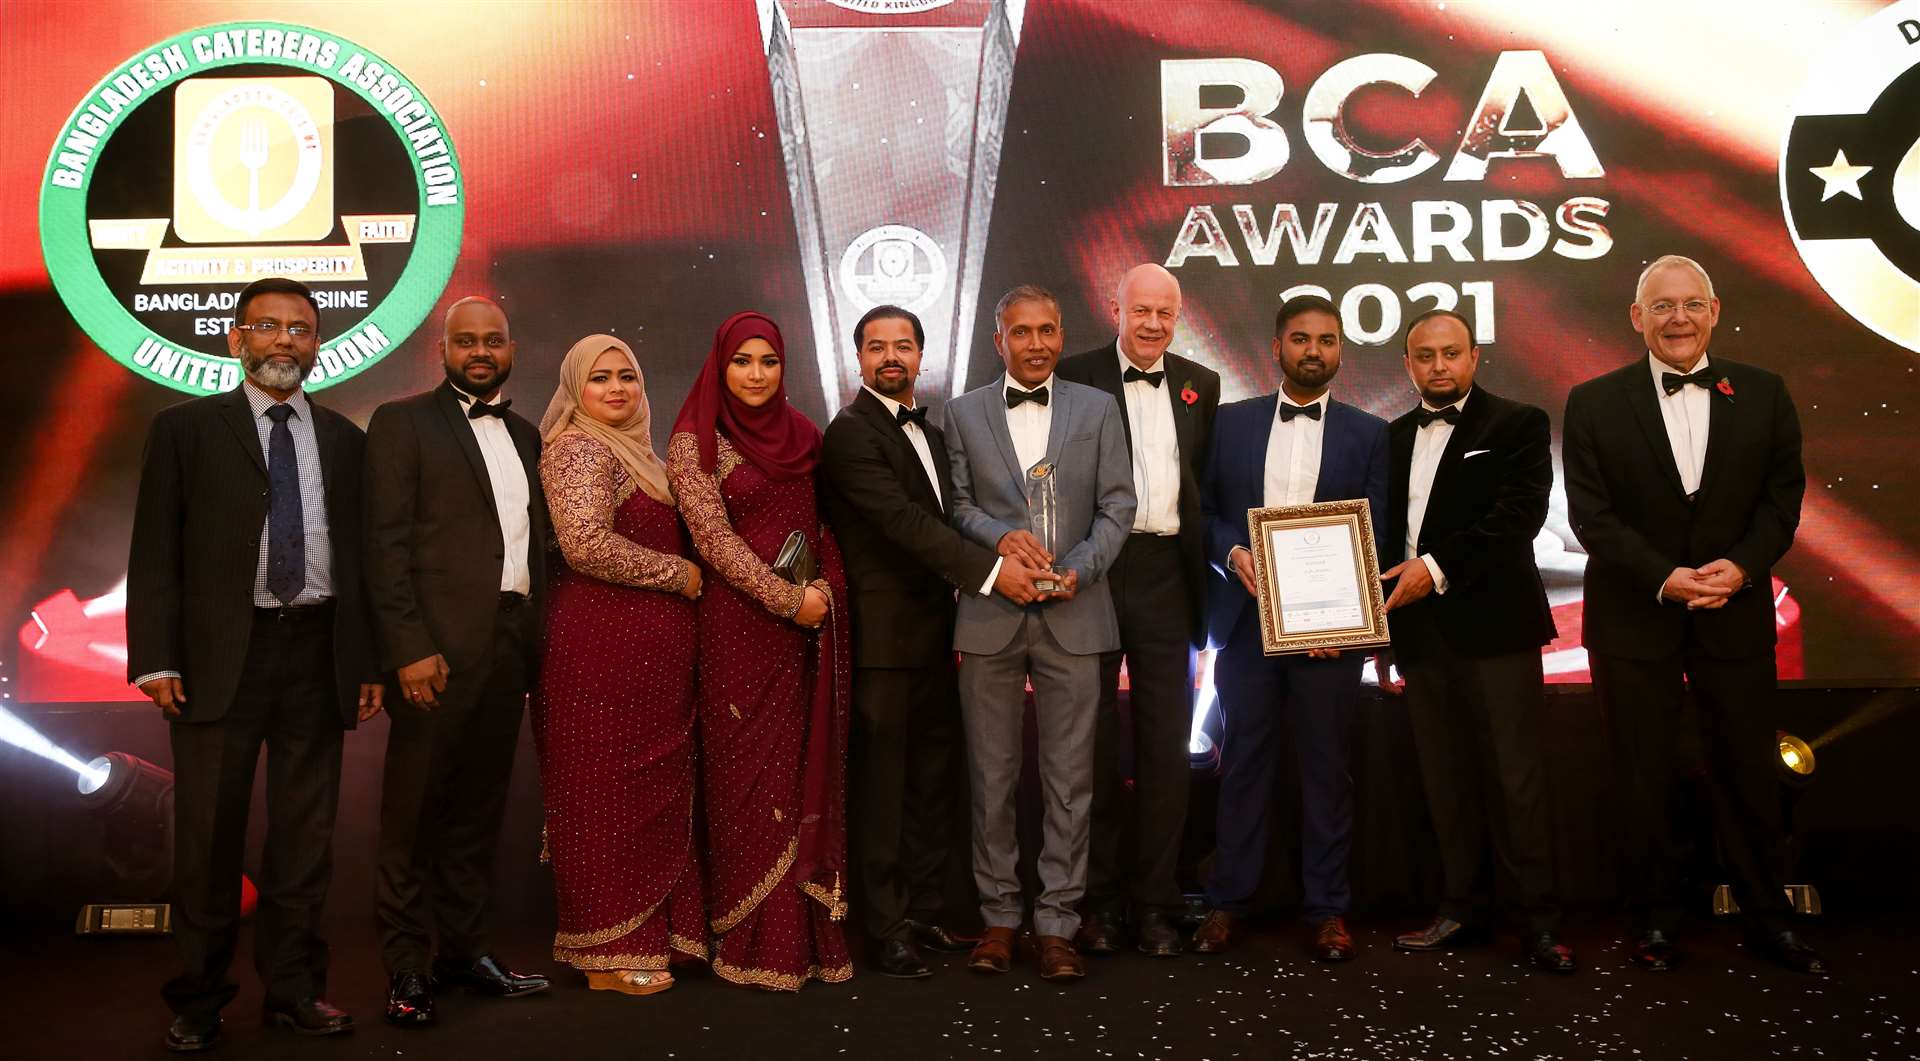 Staff at Cinnamon Spice collecting their award presented by MP Damian Green. Picture: BCA